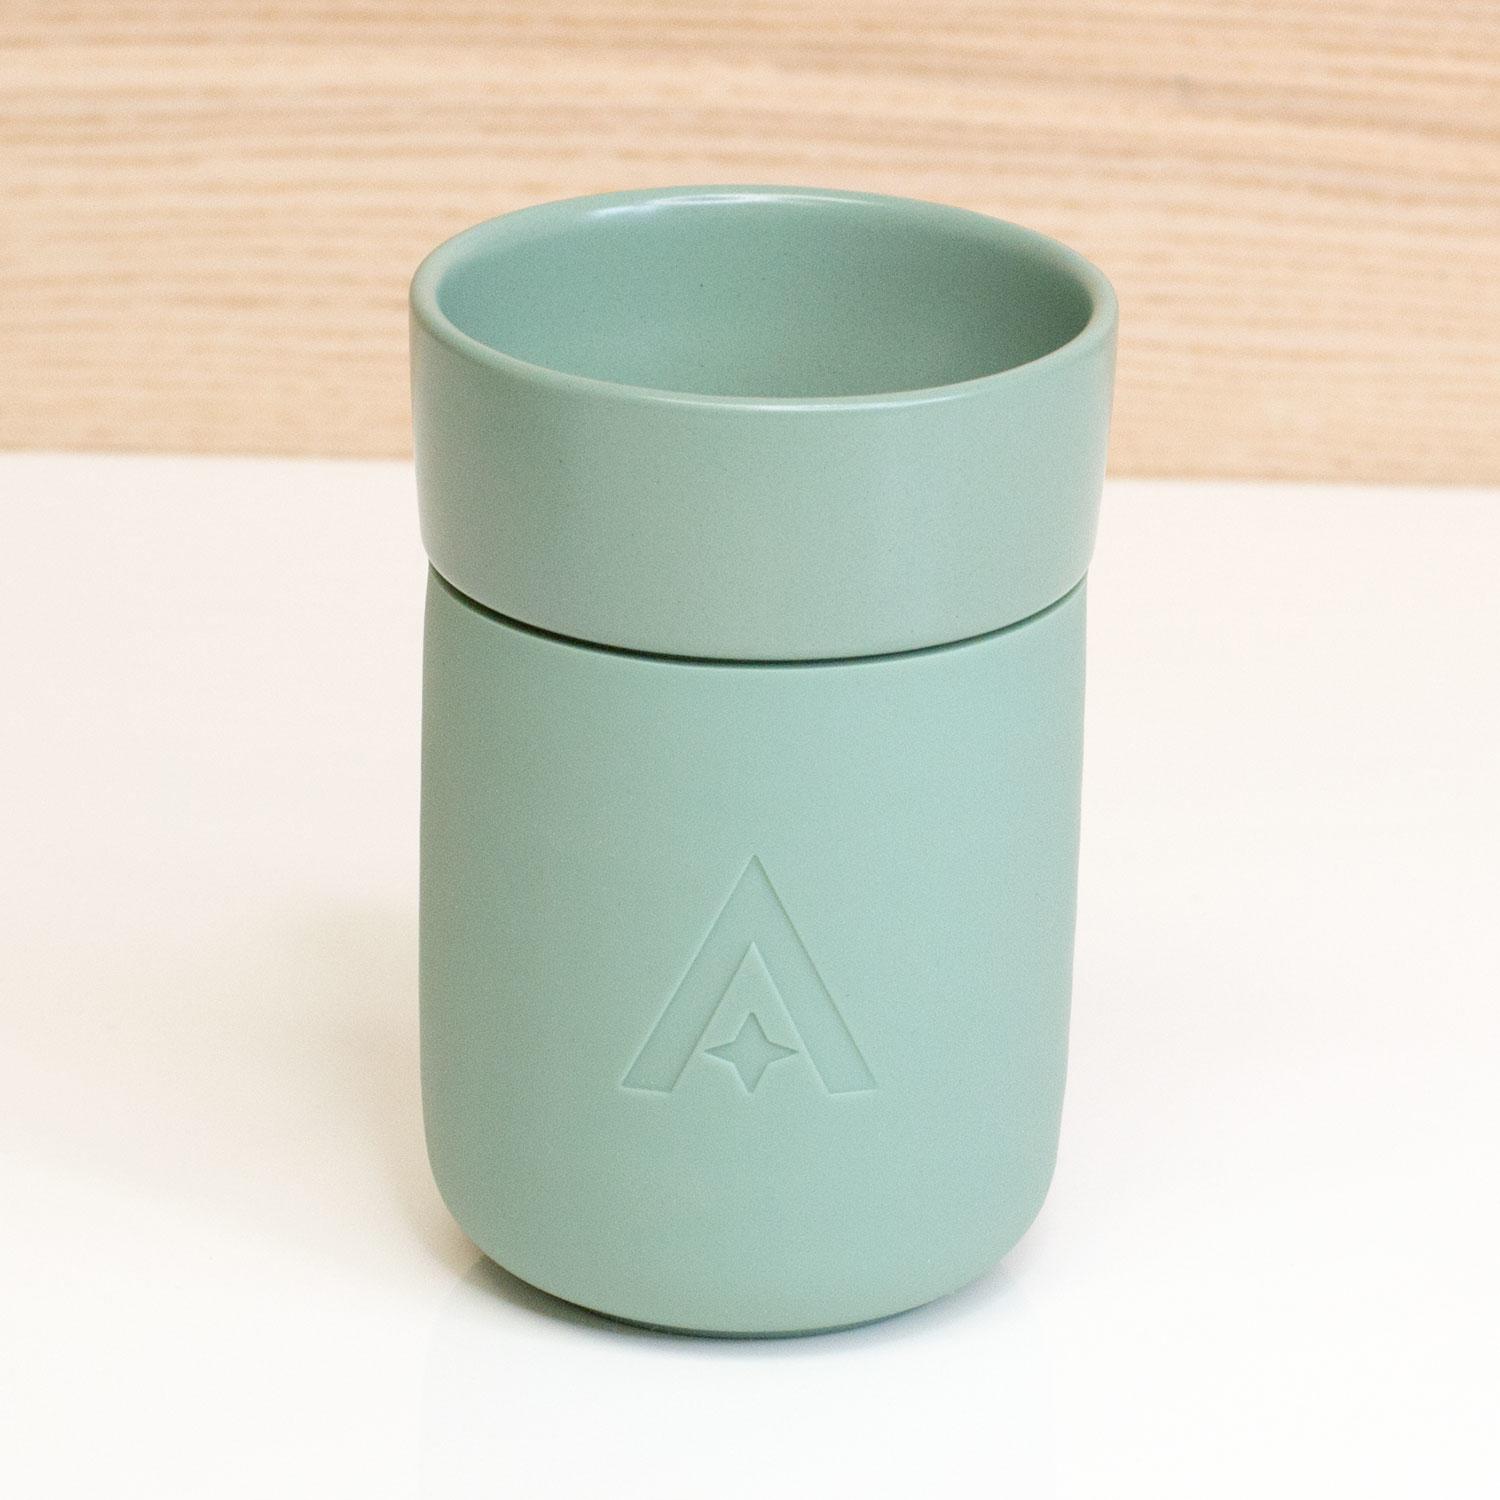 Carry Cup - The Universal Travel Mug by Uberstar (Sage Green)